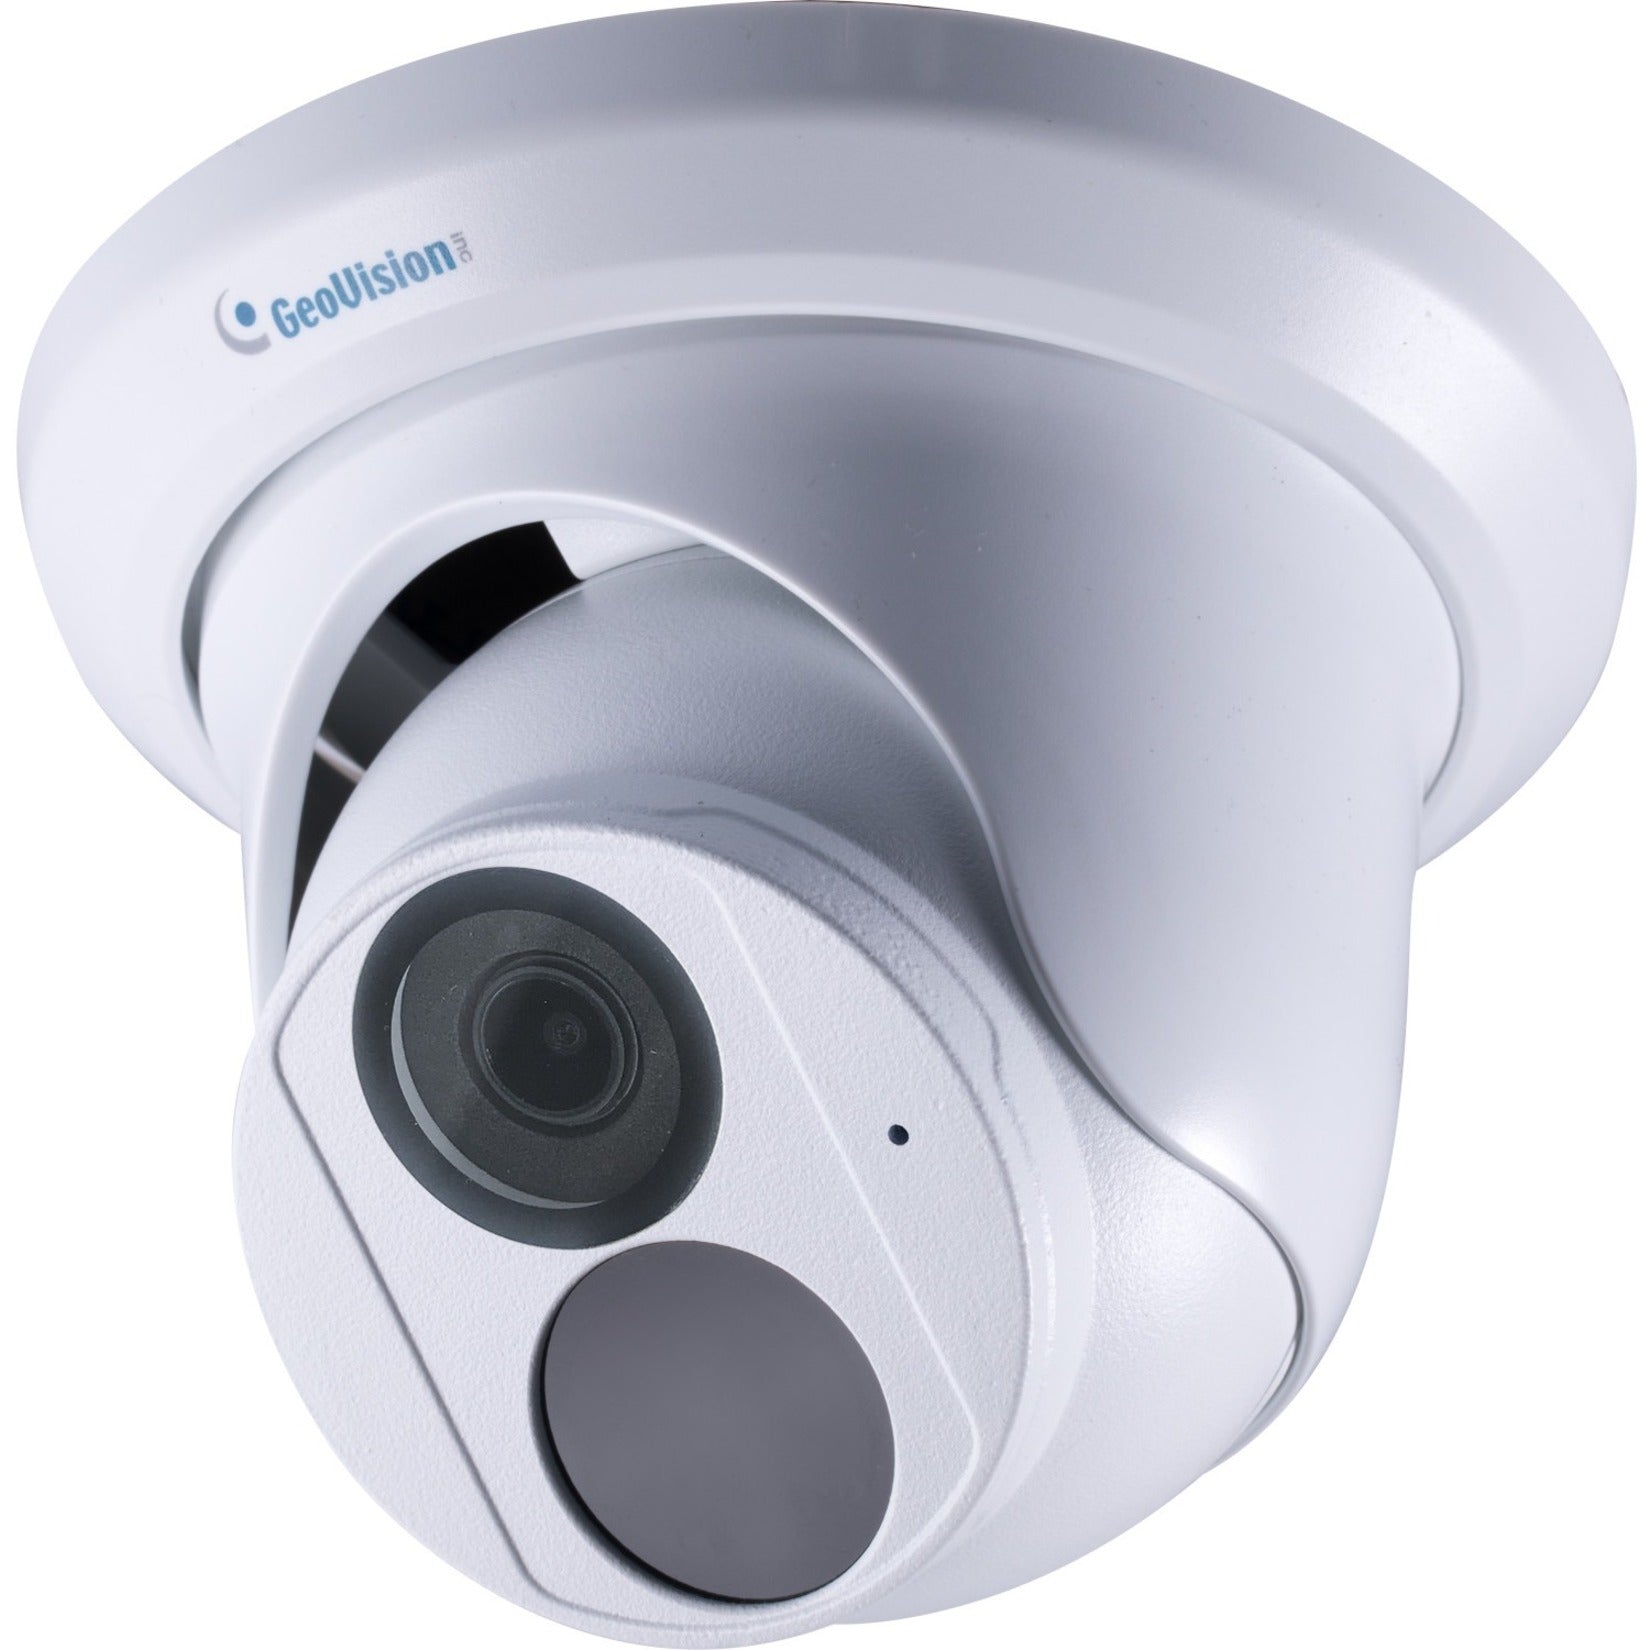 GeoVision GV-EBD4701 4MP H.265 Super Low Lux WDR Pro IR Eyeball Dome IP Camera, Outdoor, 98.43 ft Night Vision